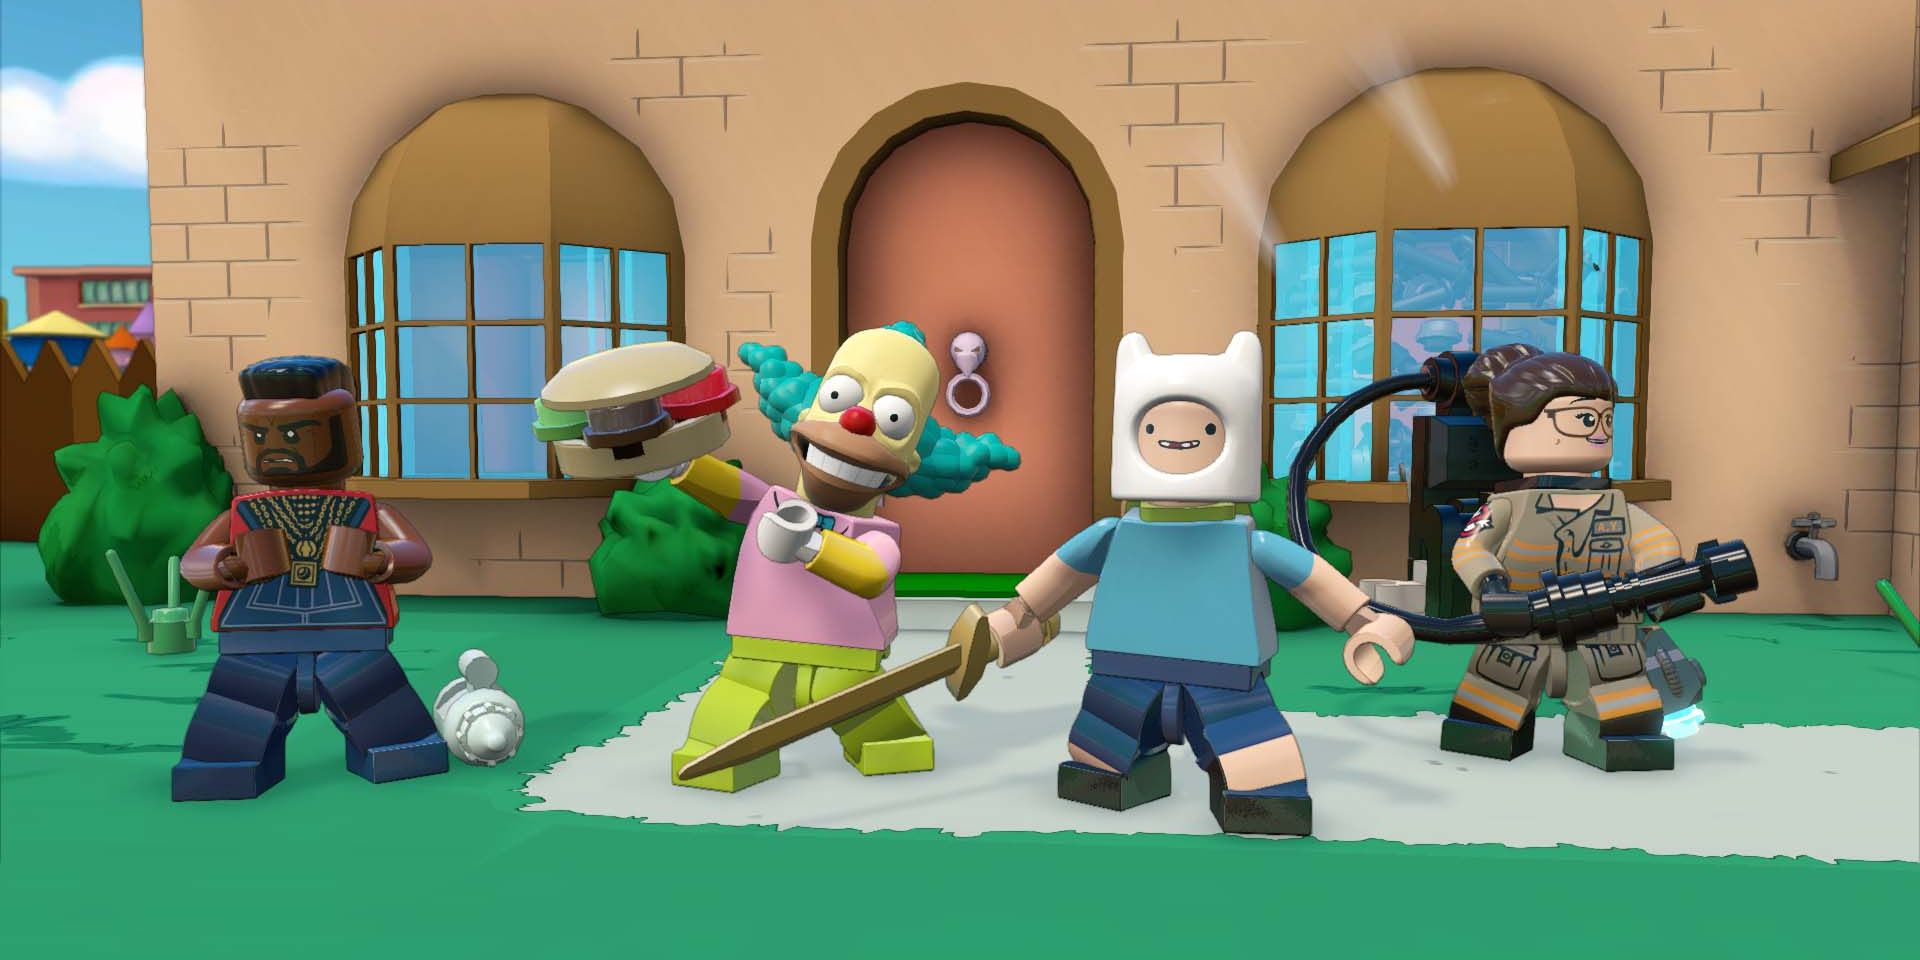 Finn, Krusty, Mr. T, and Ghostbuster in Springfield in Lego Dimensions